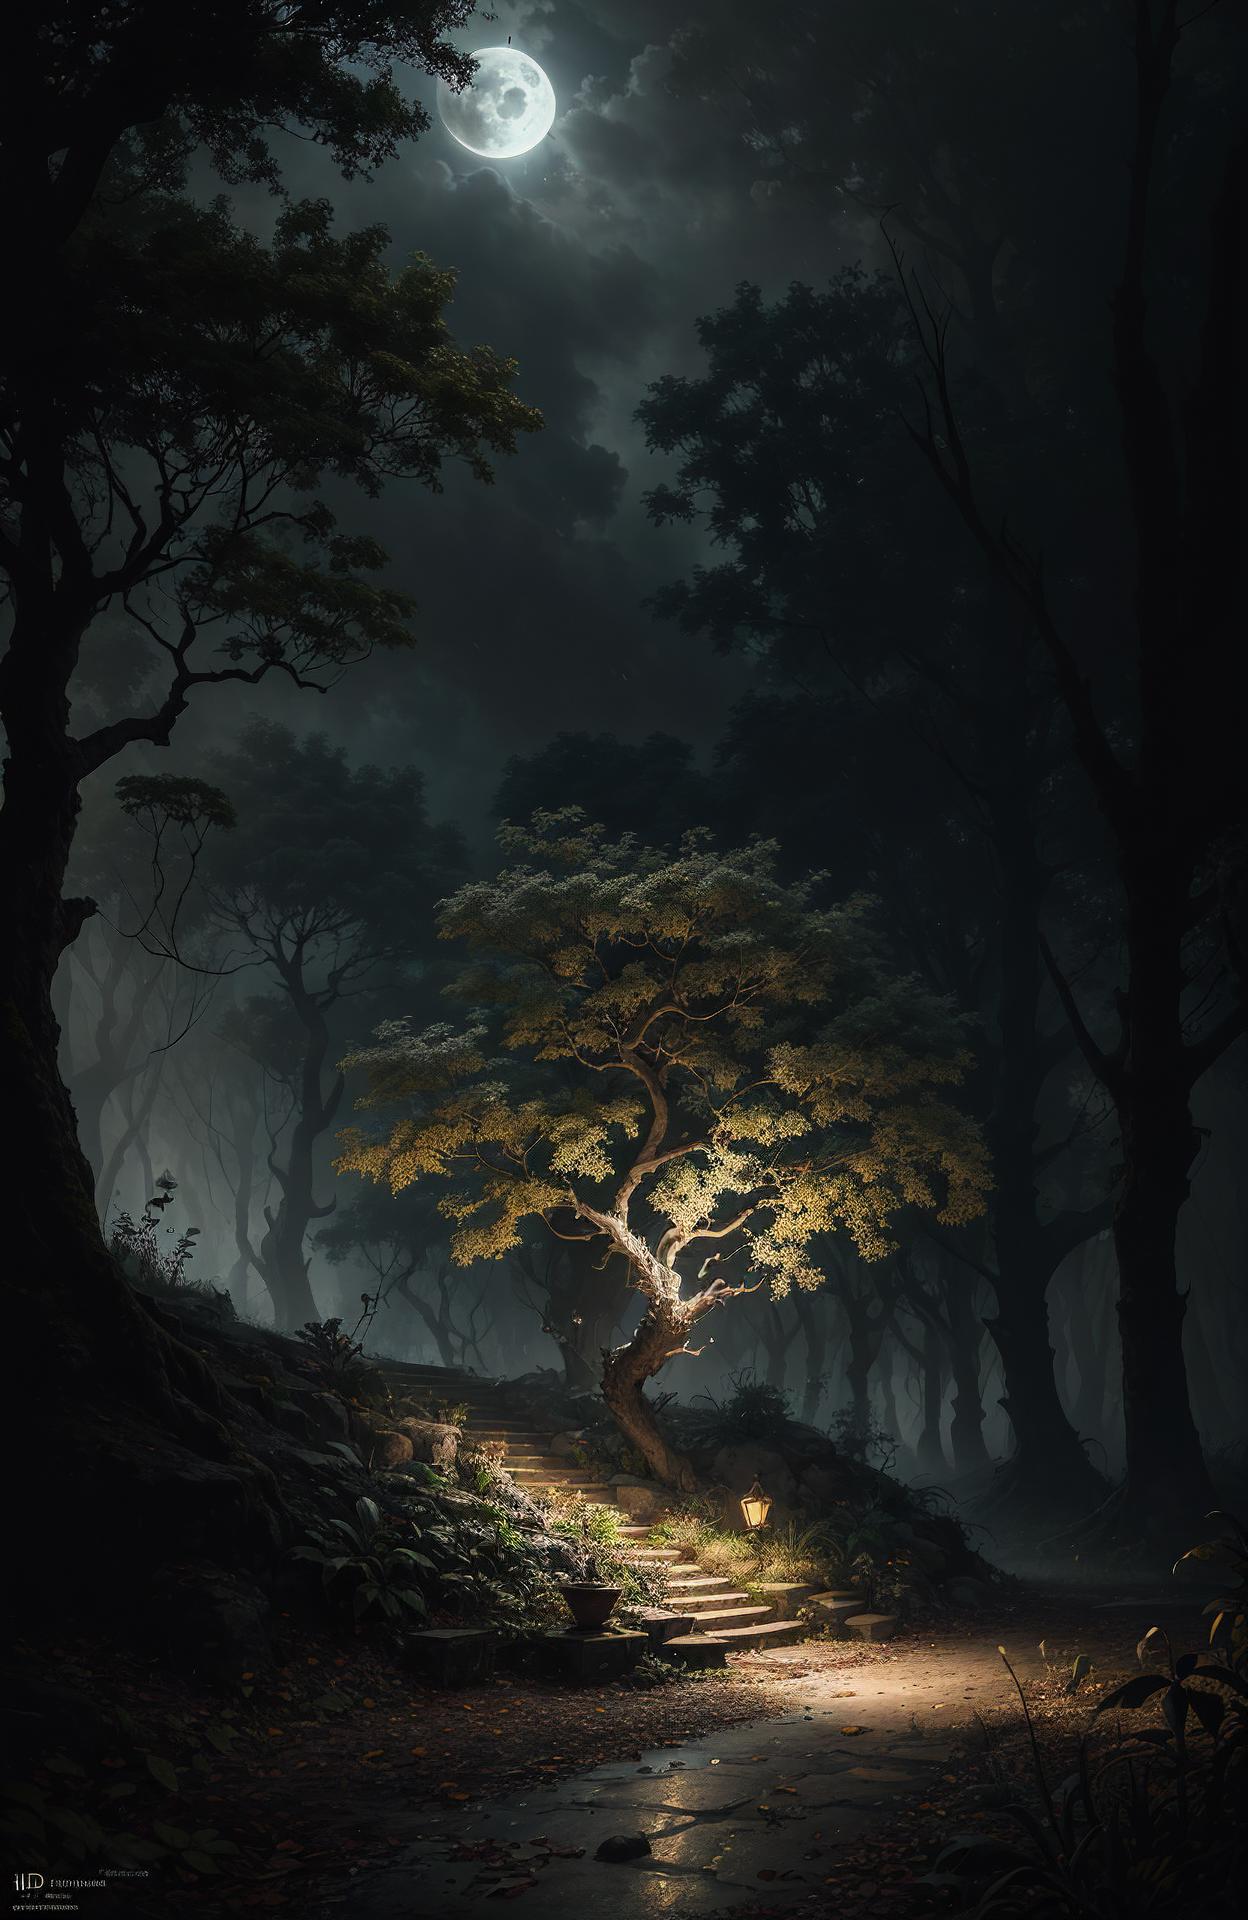 A Tree in a Dark Forest with a Lighted Path Leading to It